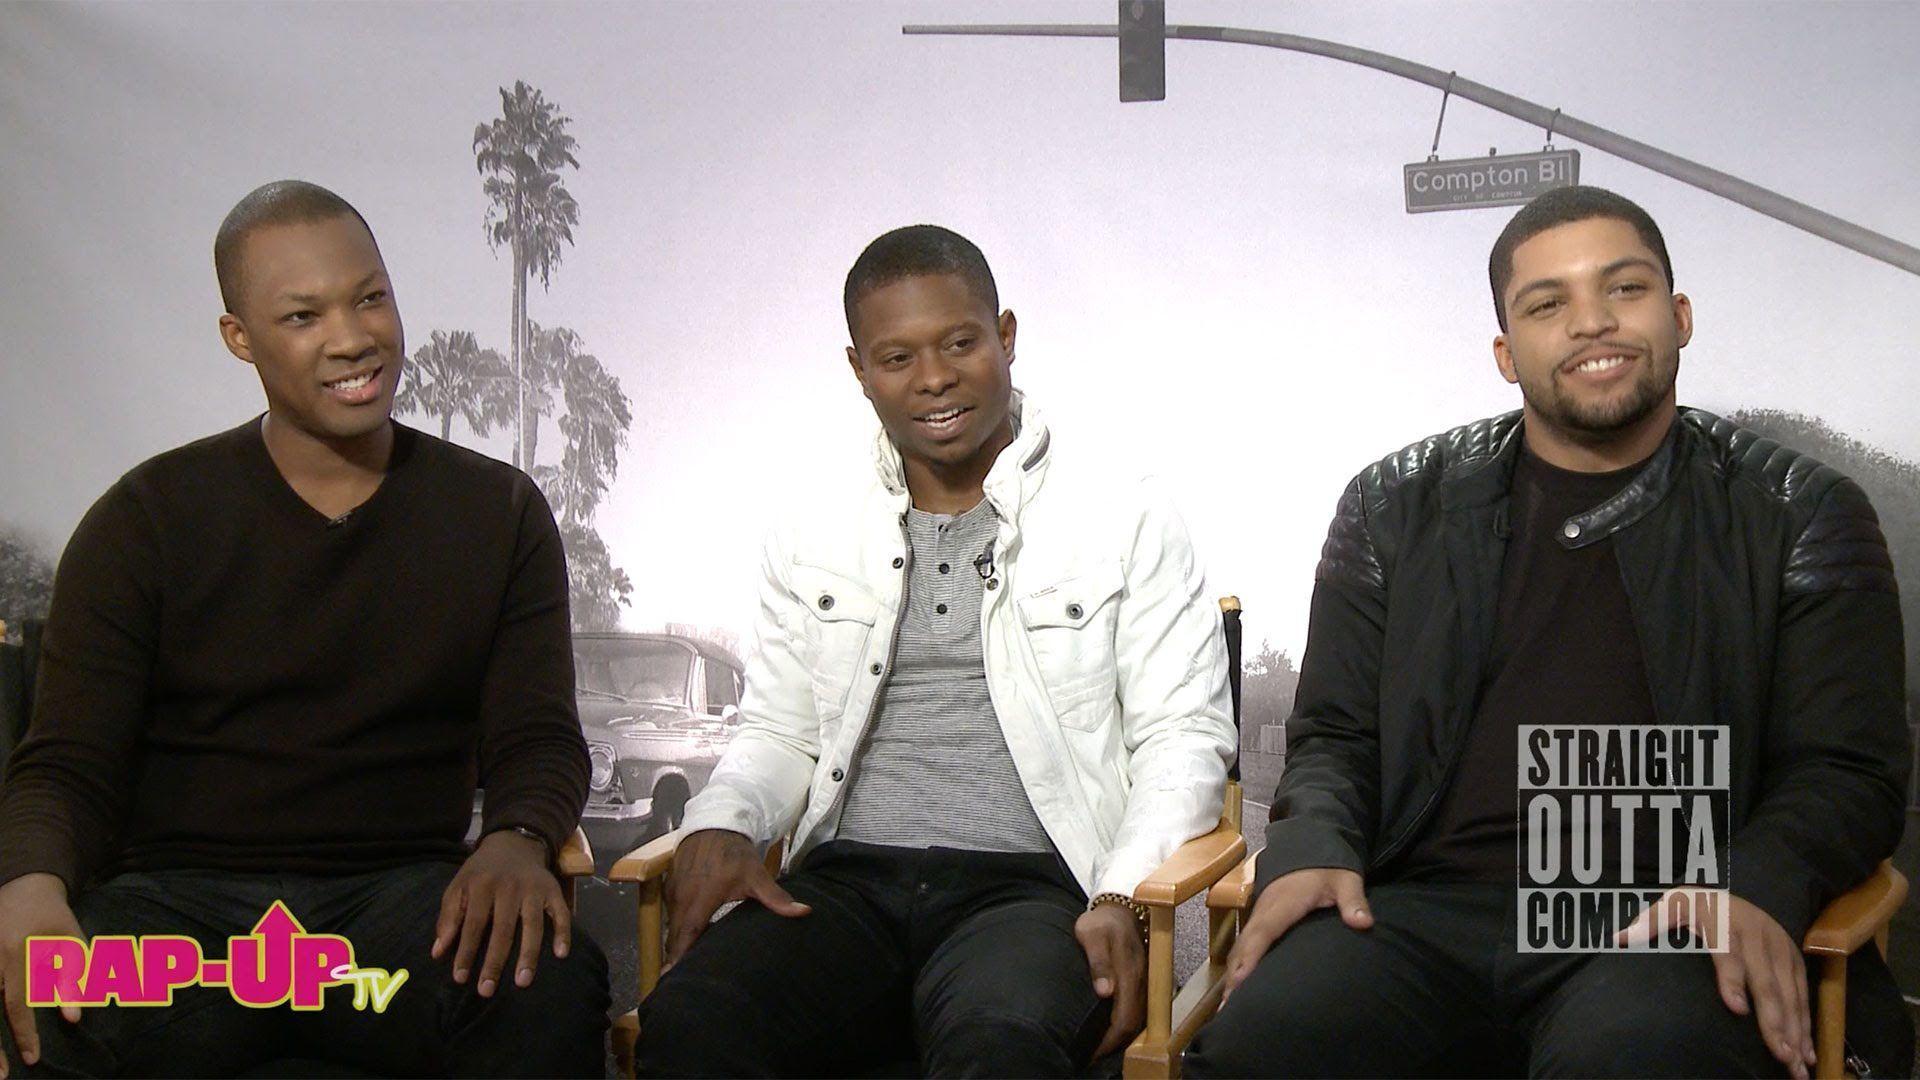 Straight Outta Compton' Cast Brings N.W.A. to the Big Screen